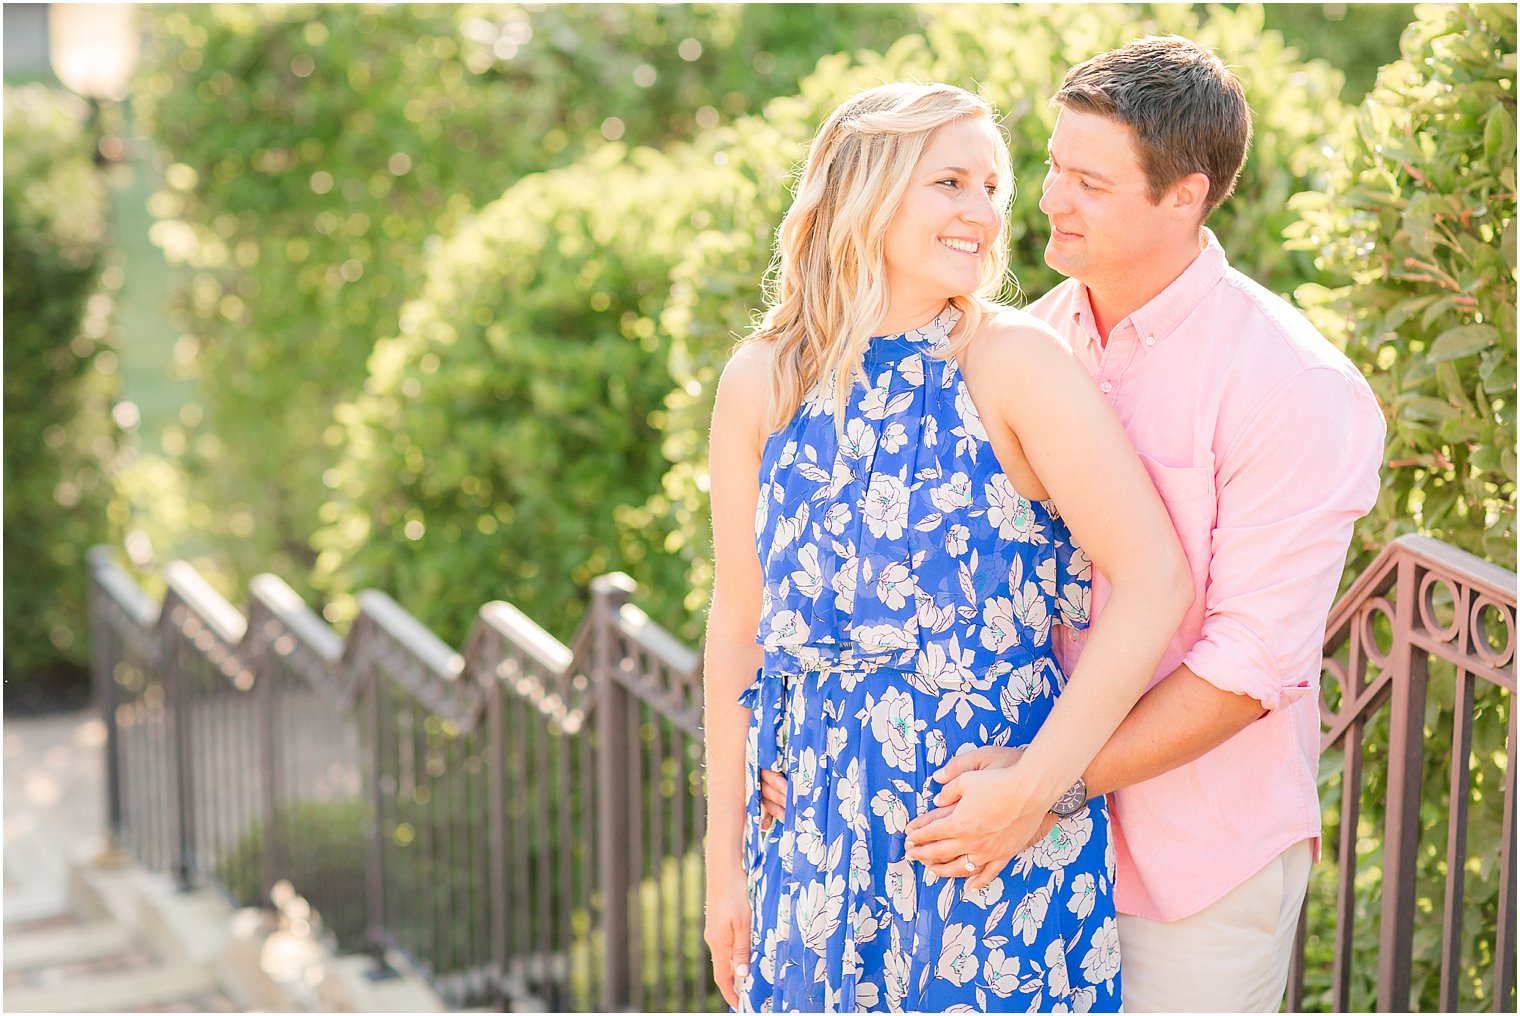 Pink and blue outfit inspiration during summer engagement session at Laurita Winery